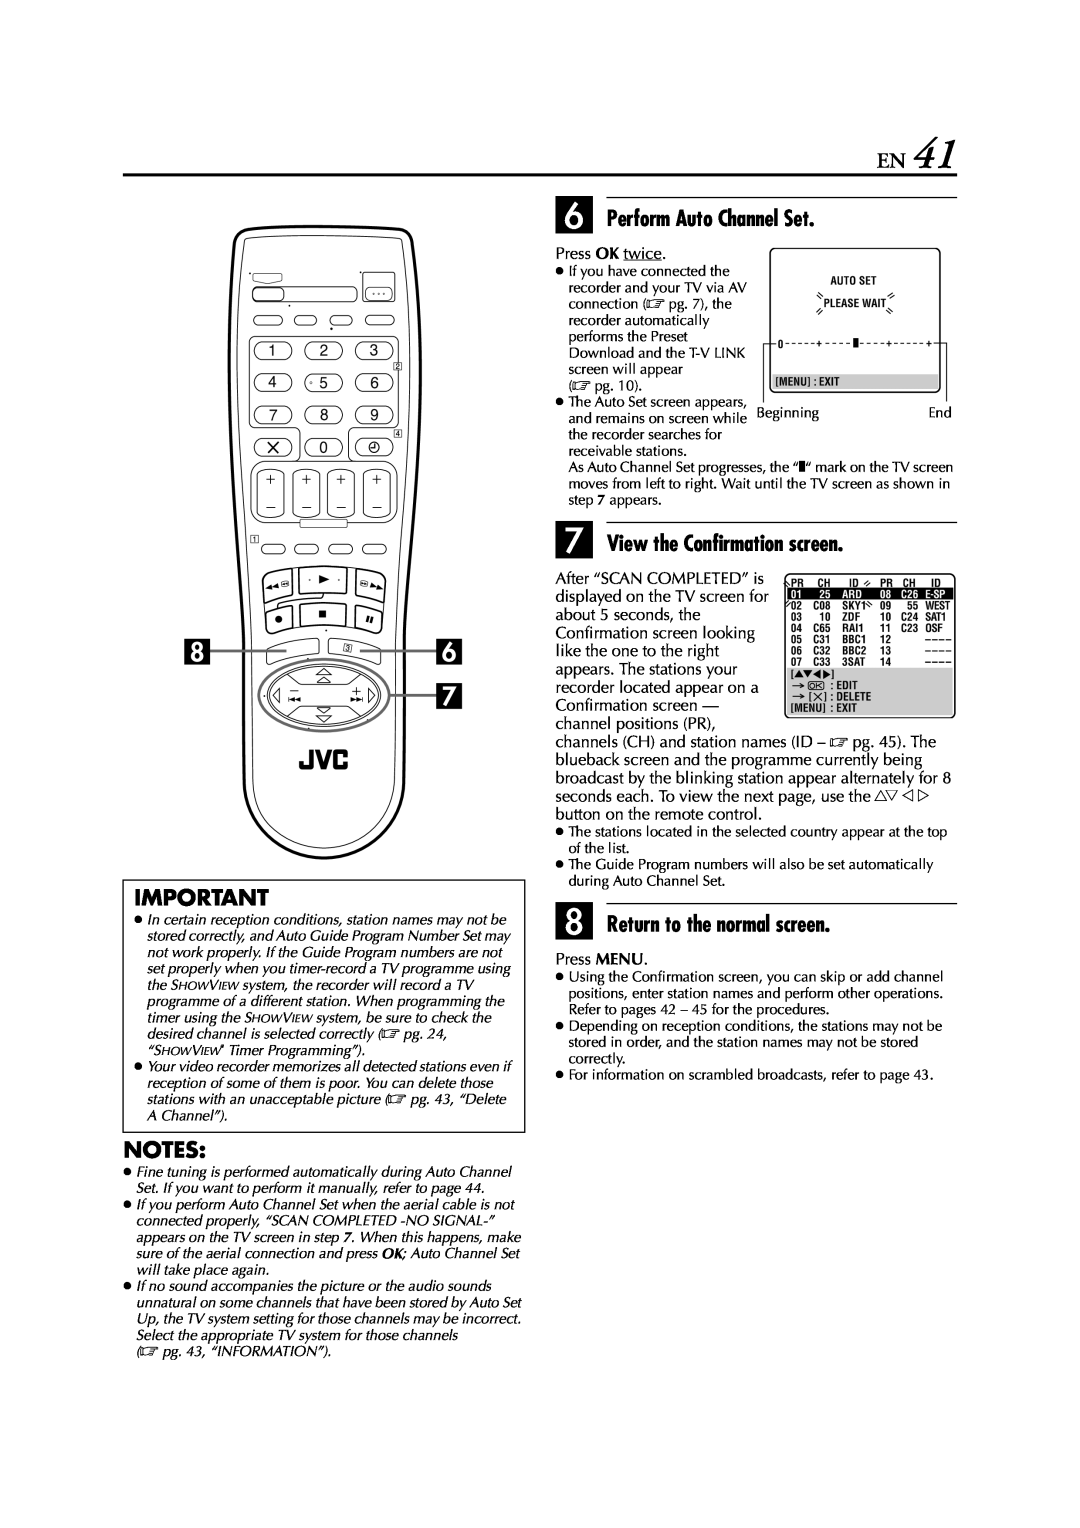 JVC HR-J674EU instruction manual F Perform Auto Channel Set, G View the Confirmation screen, H Return to the normal screen 